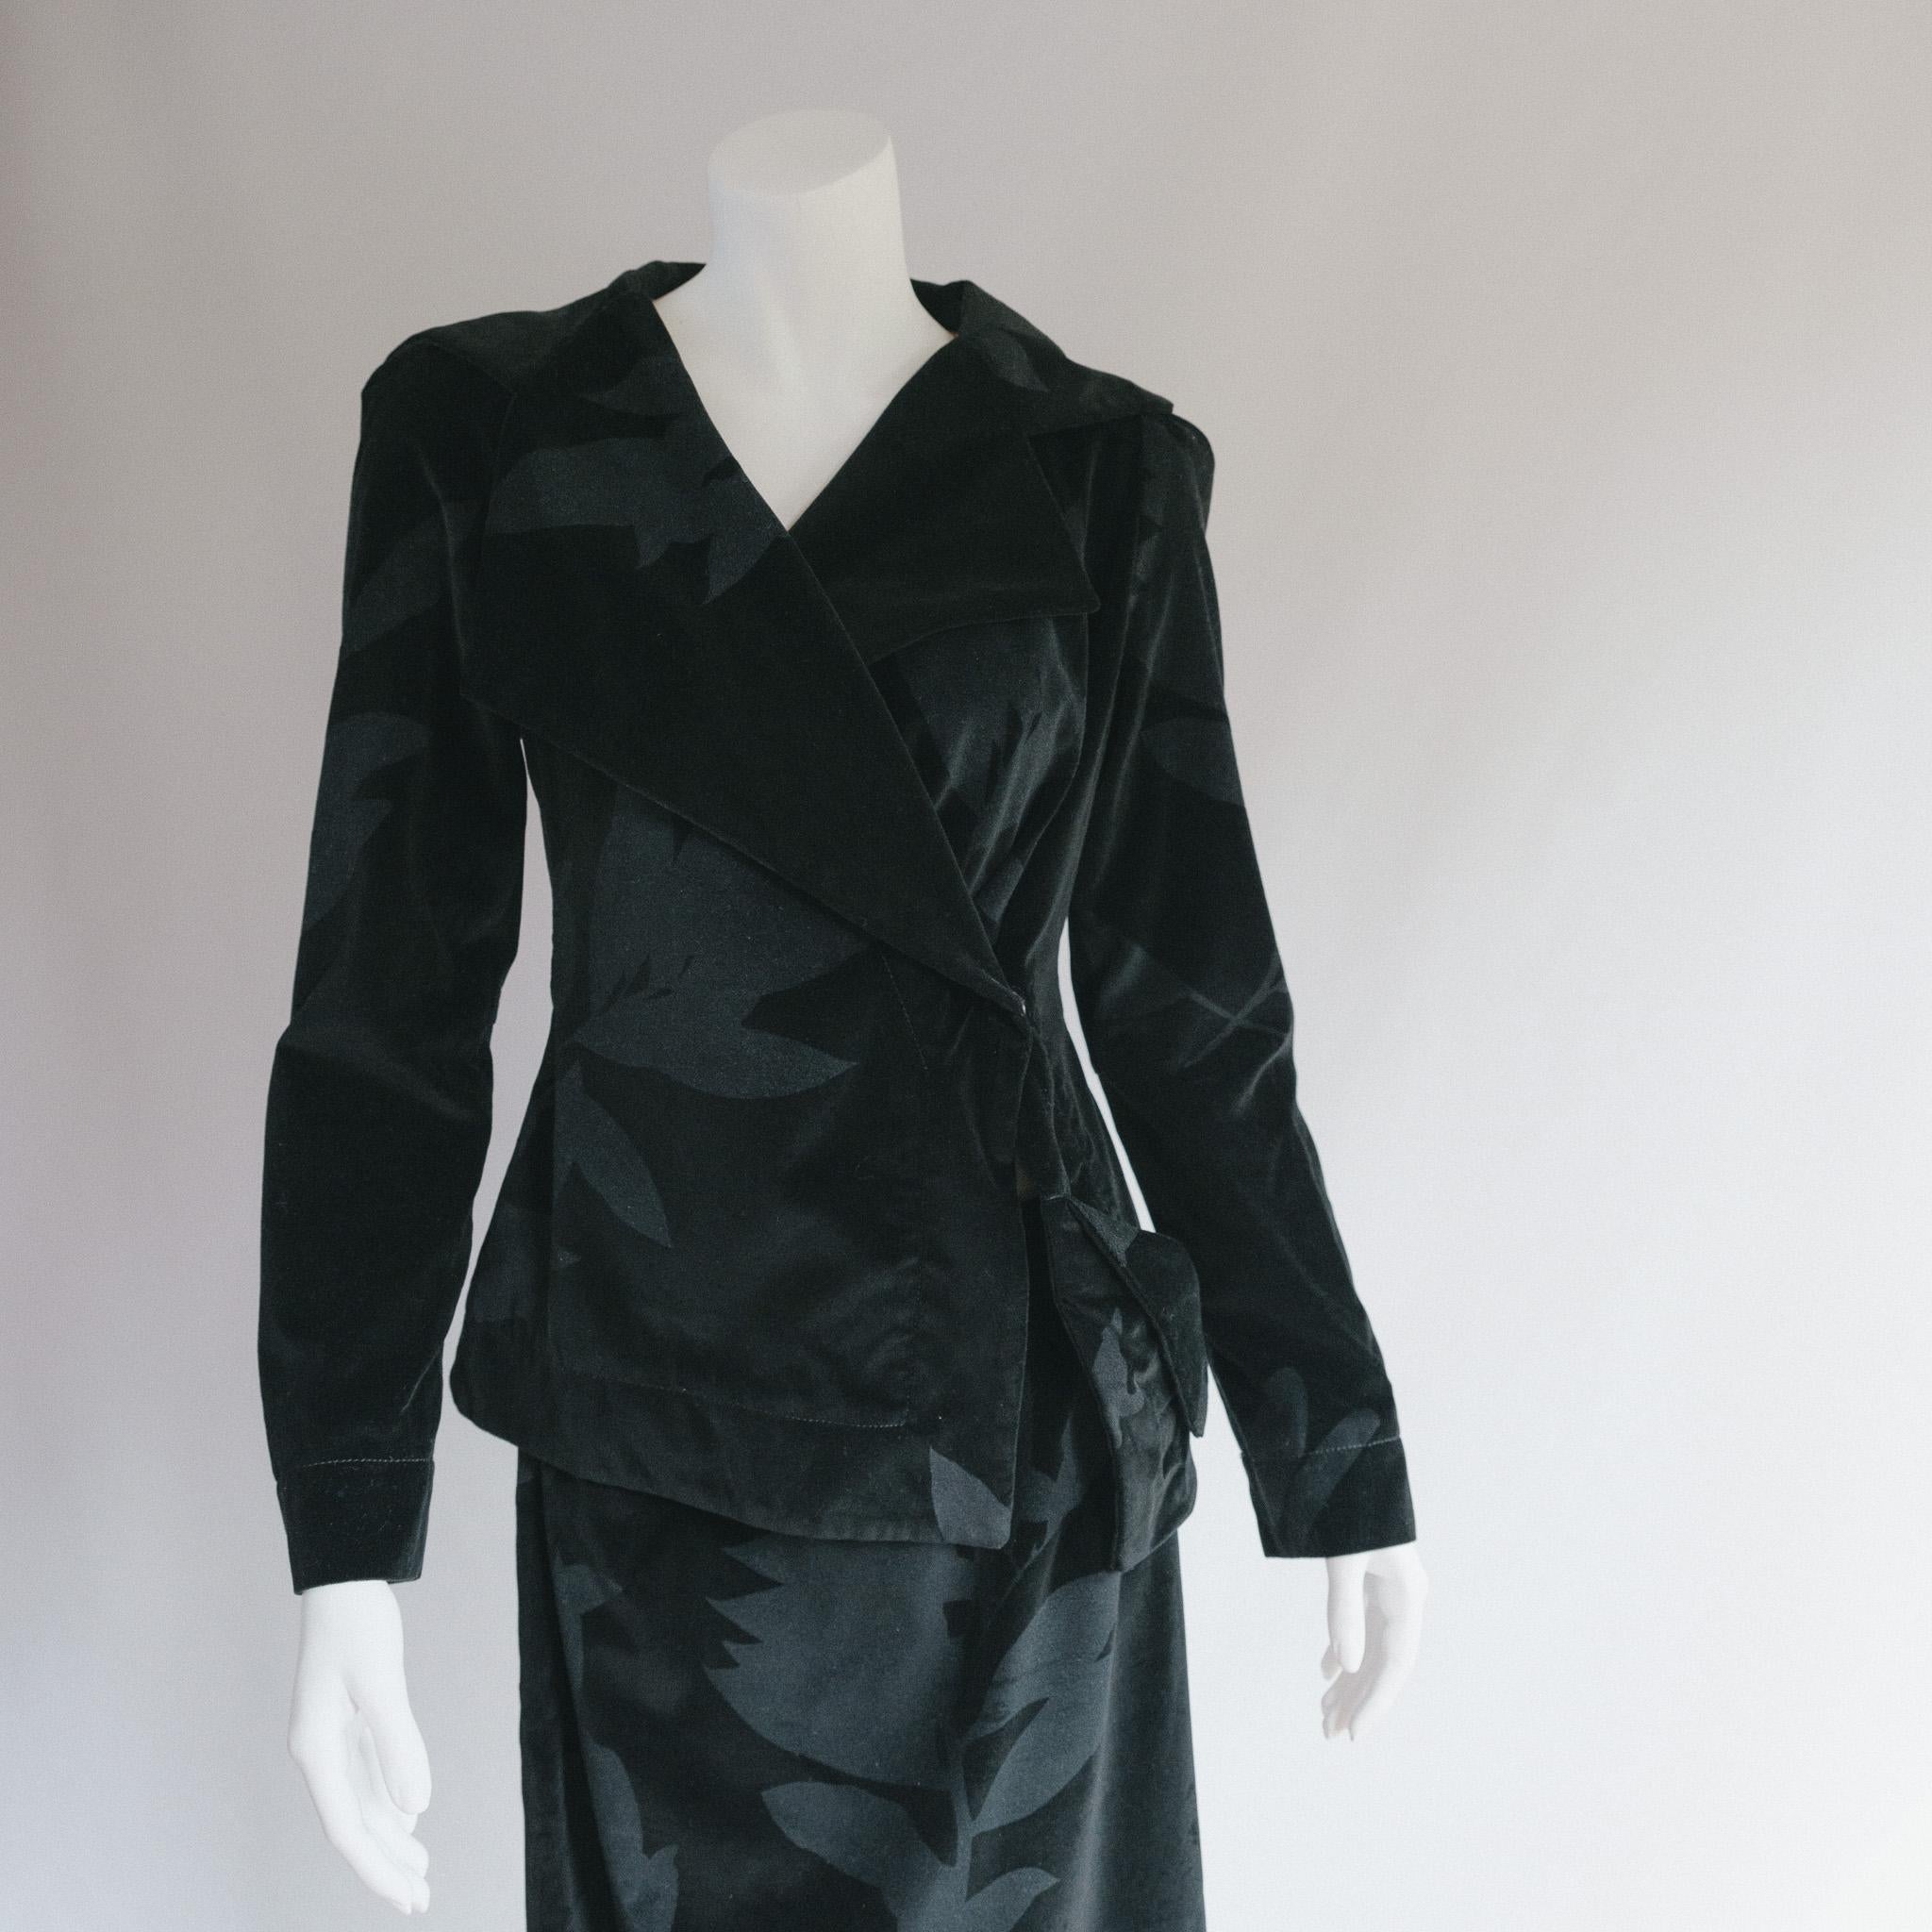 Vivienne Westwood Crushed Velvet Black Corset Jacket Skirt Suit


Vivienne Westwood Red Label judging by the tag early 90s 
Lined with emblamed embossed lining, viv buttons all the bells and whistles 
exceptionally flattering and well cut 
pretty